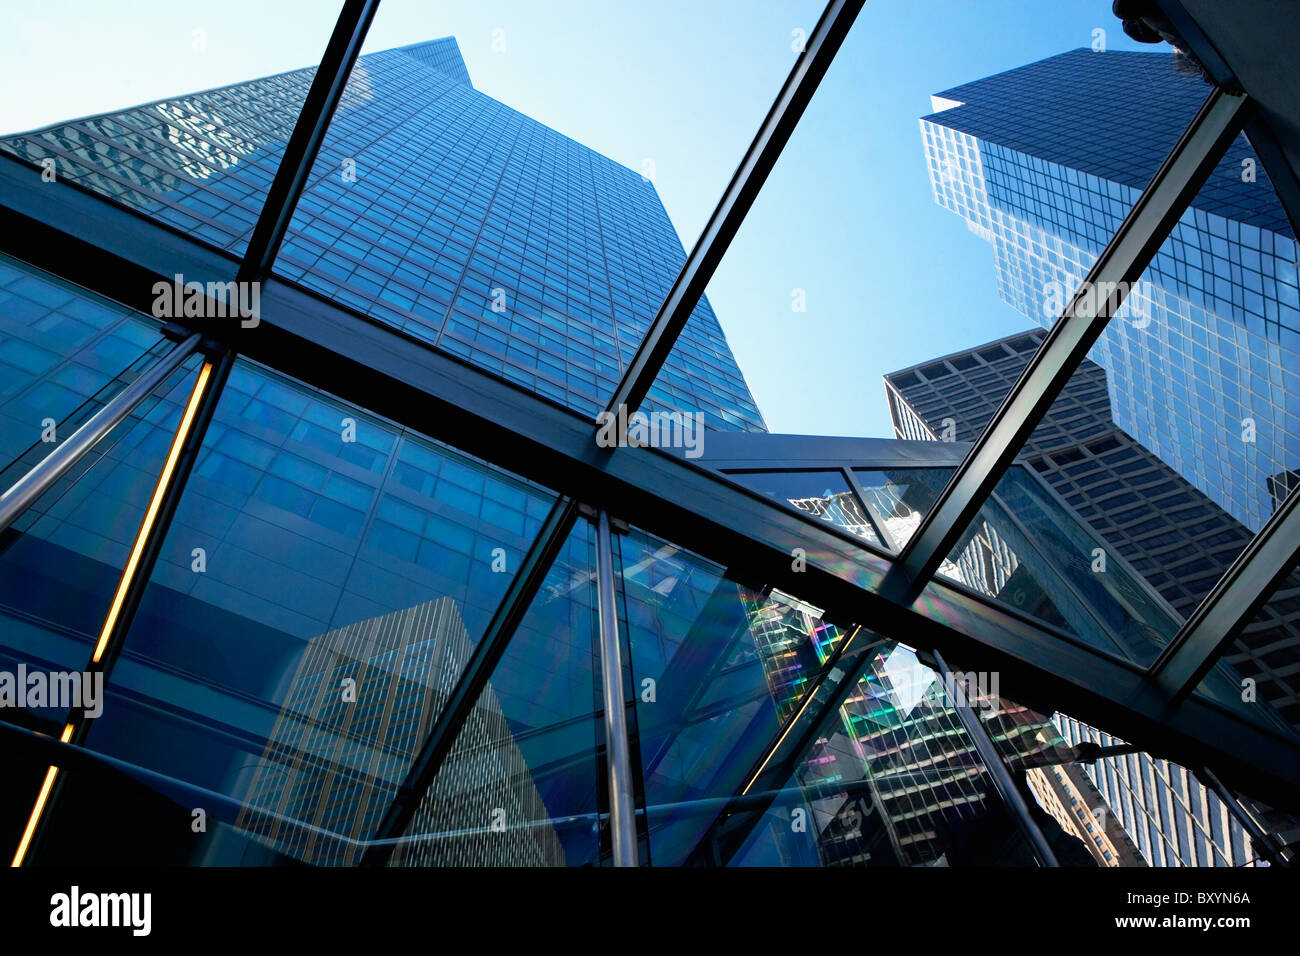 Tall skyscrapers seen through glass ceiling of modern office building Stock Photo